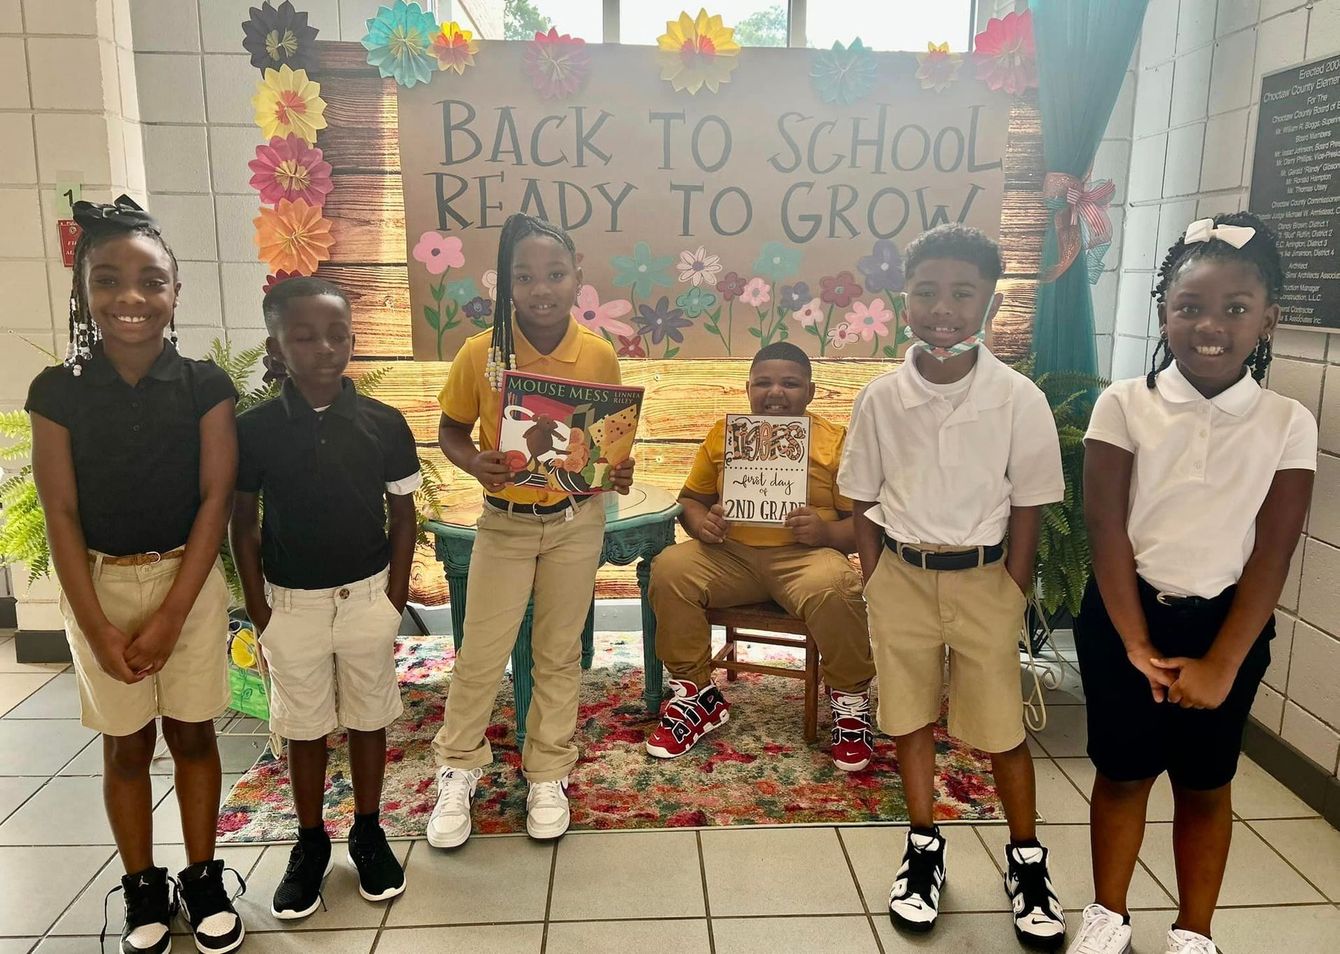 a group of children are standing in front of a sign that says back to school ready to grow .